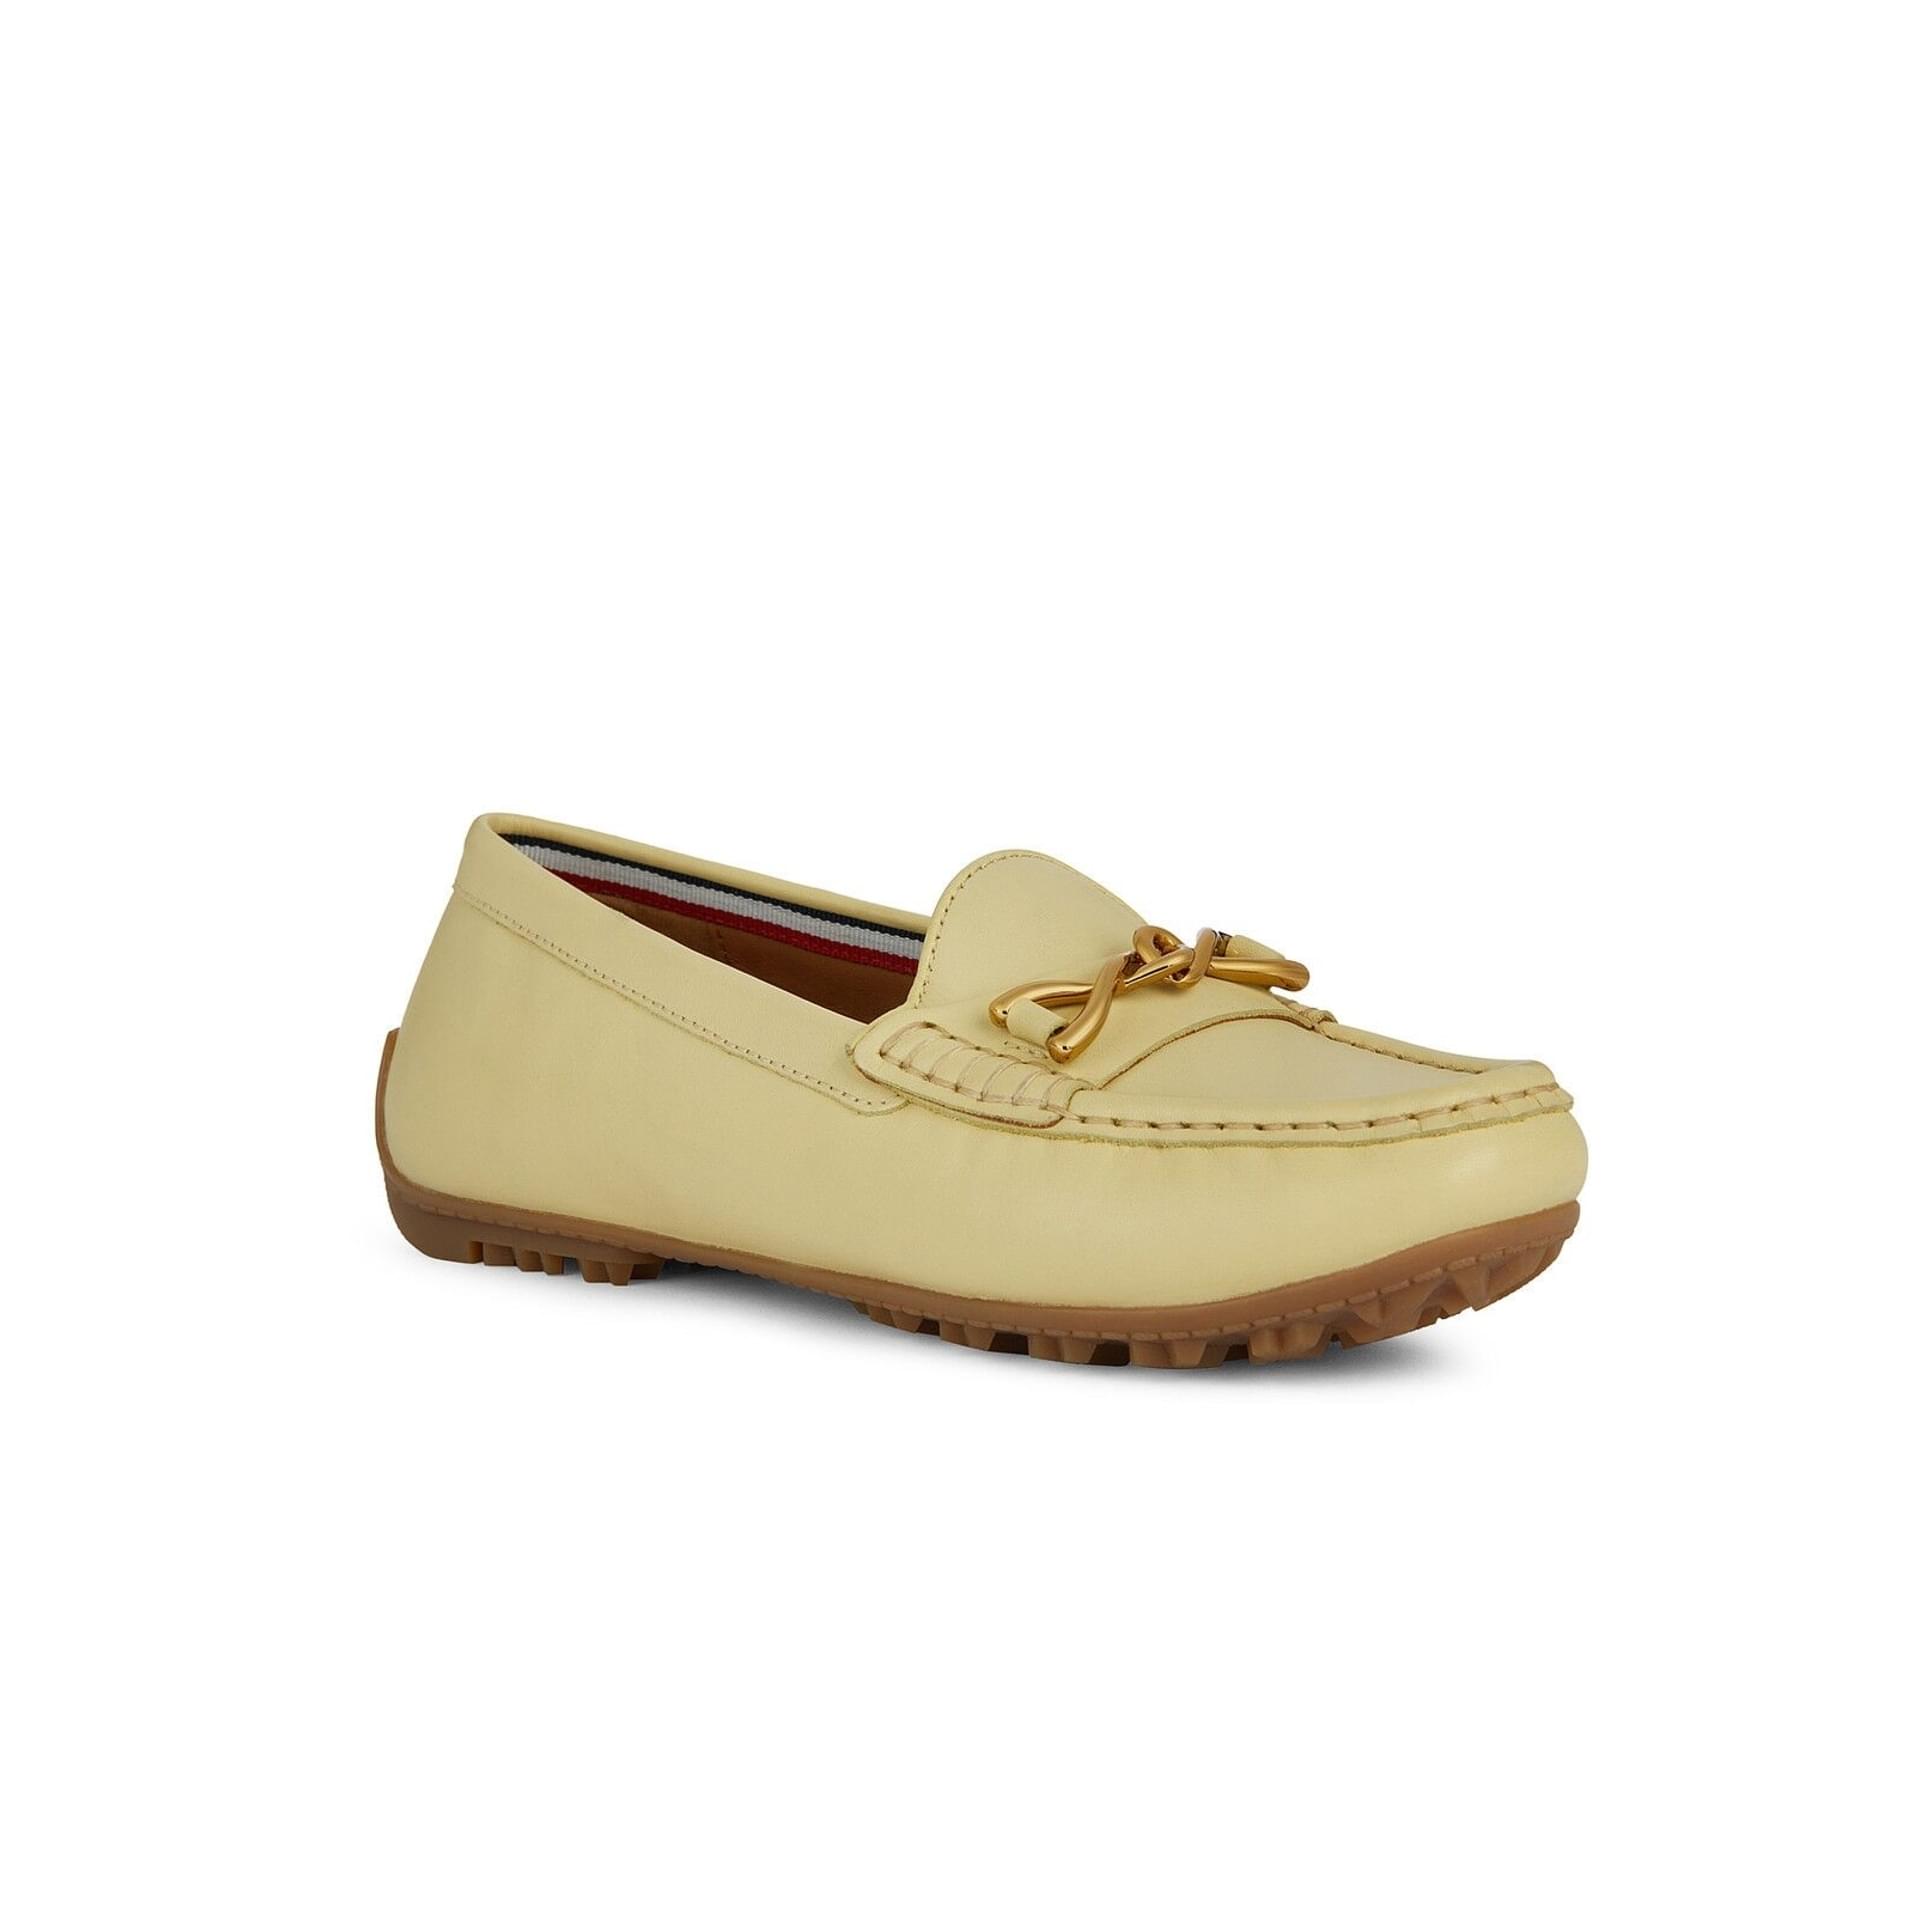 Geox Kosmopolis + Grip Moccassins D35RCB_00043 in Light Yellow